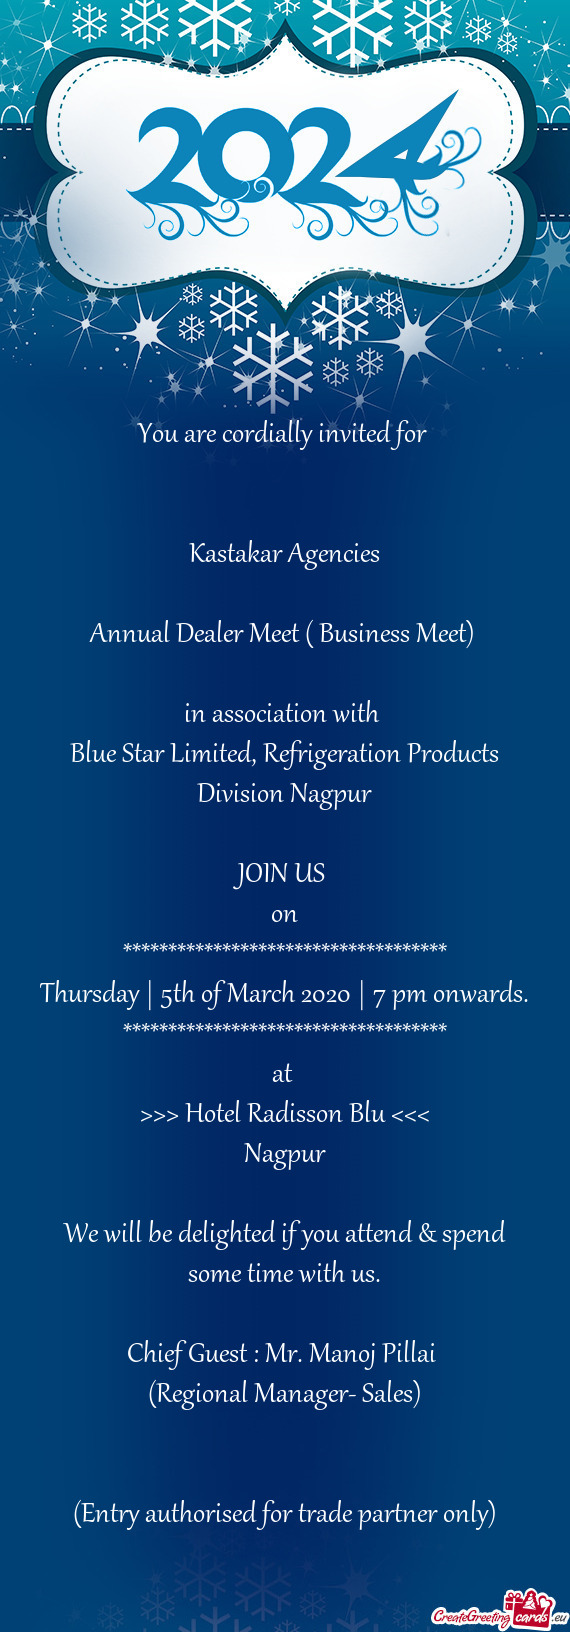 Blue Star Limited, Refrigeration Products Division Nagpur